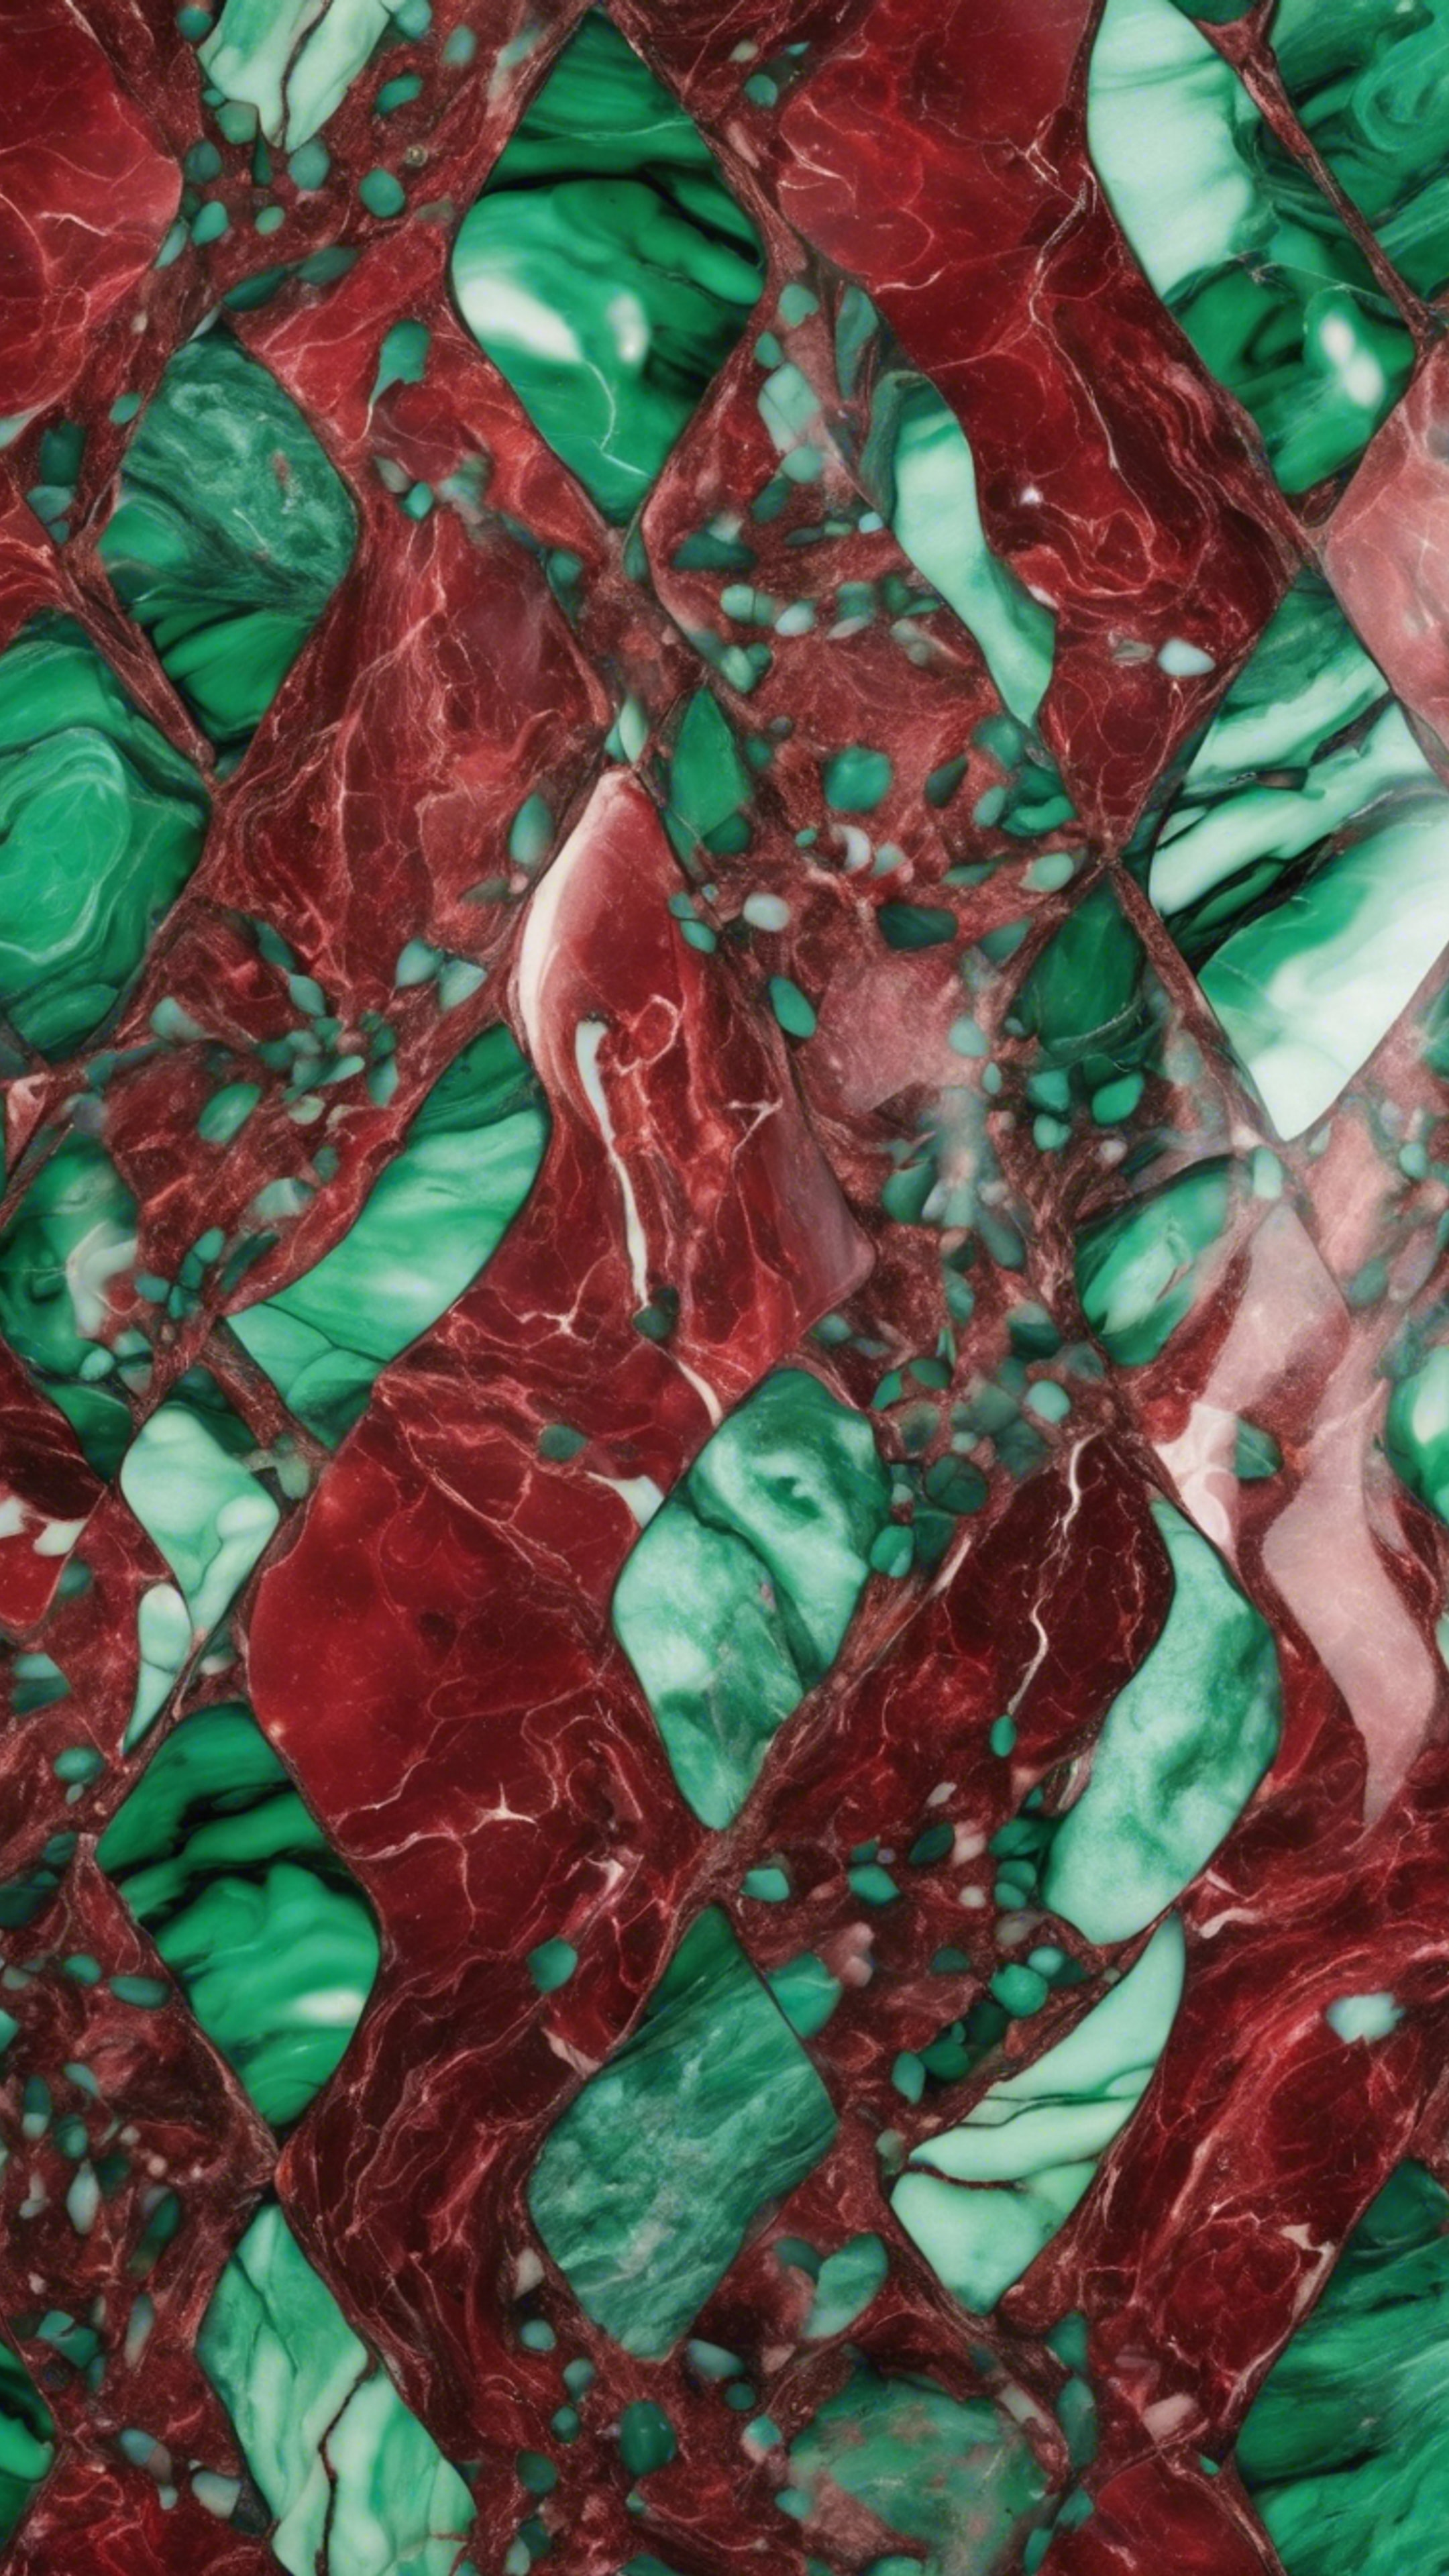 A flowing pattern of green and red marble reminiscent of Christmas colors. ផ្ទាំង​រូបភាព[3422960c43fd4b3ba1cd]